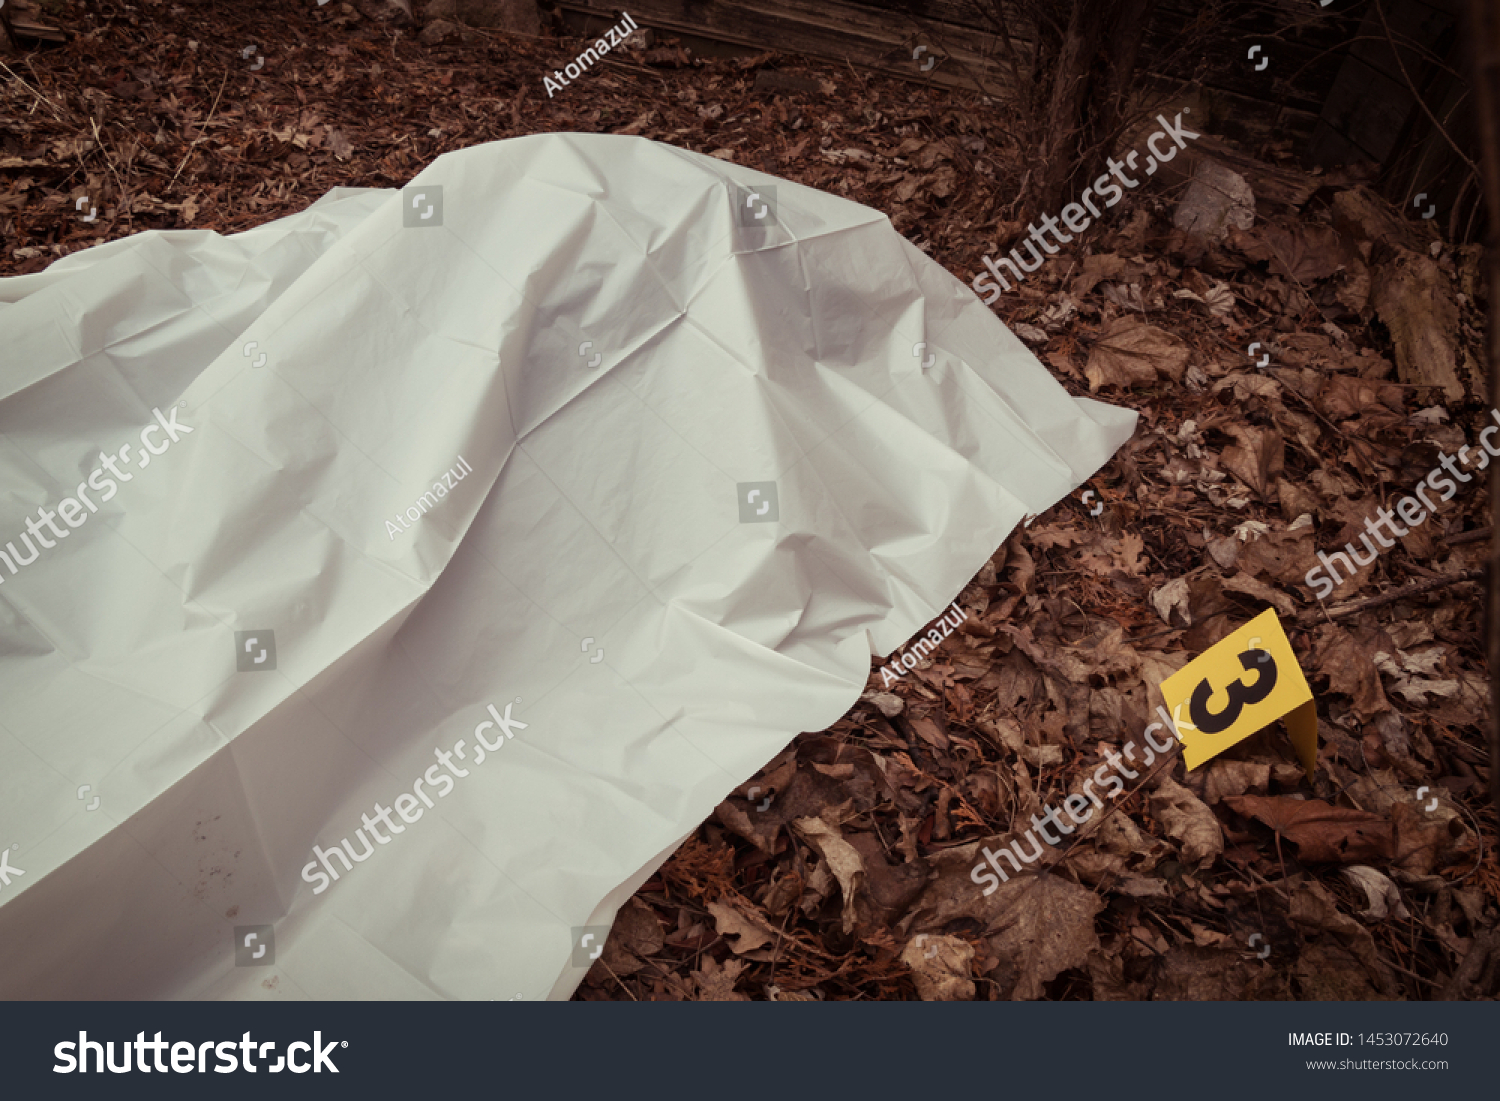 Victim of a violent crime under a sheet in a rural yard. With evidence markers. #1453072640